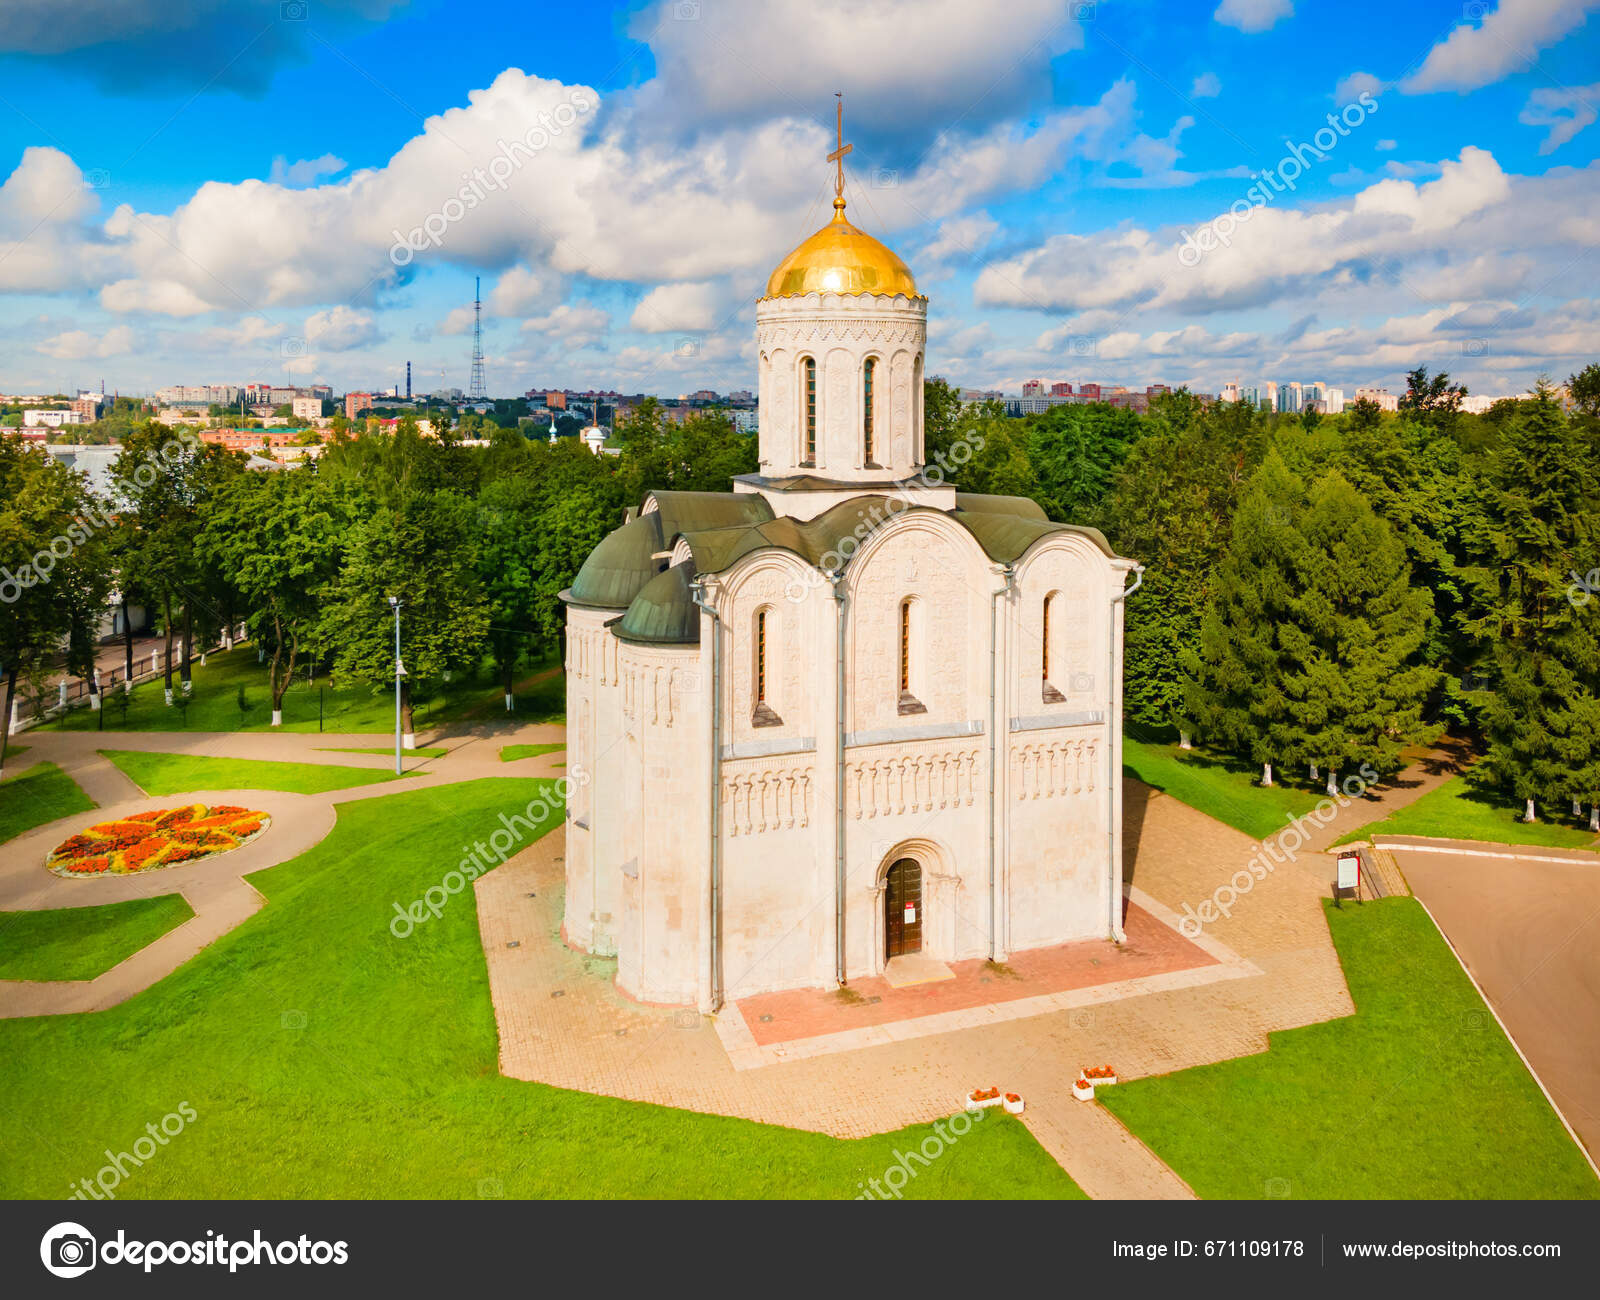 Premium Photo | Strelka park and assumption cathedral in summer yaroslavl  city touristic golden ring in russia